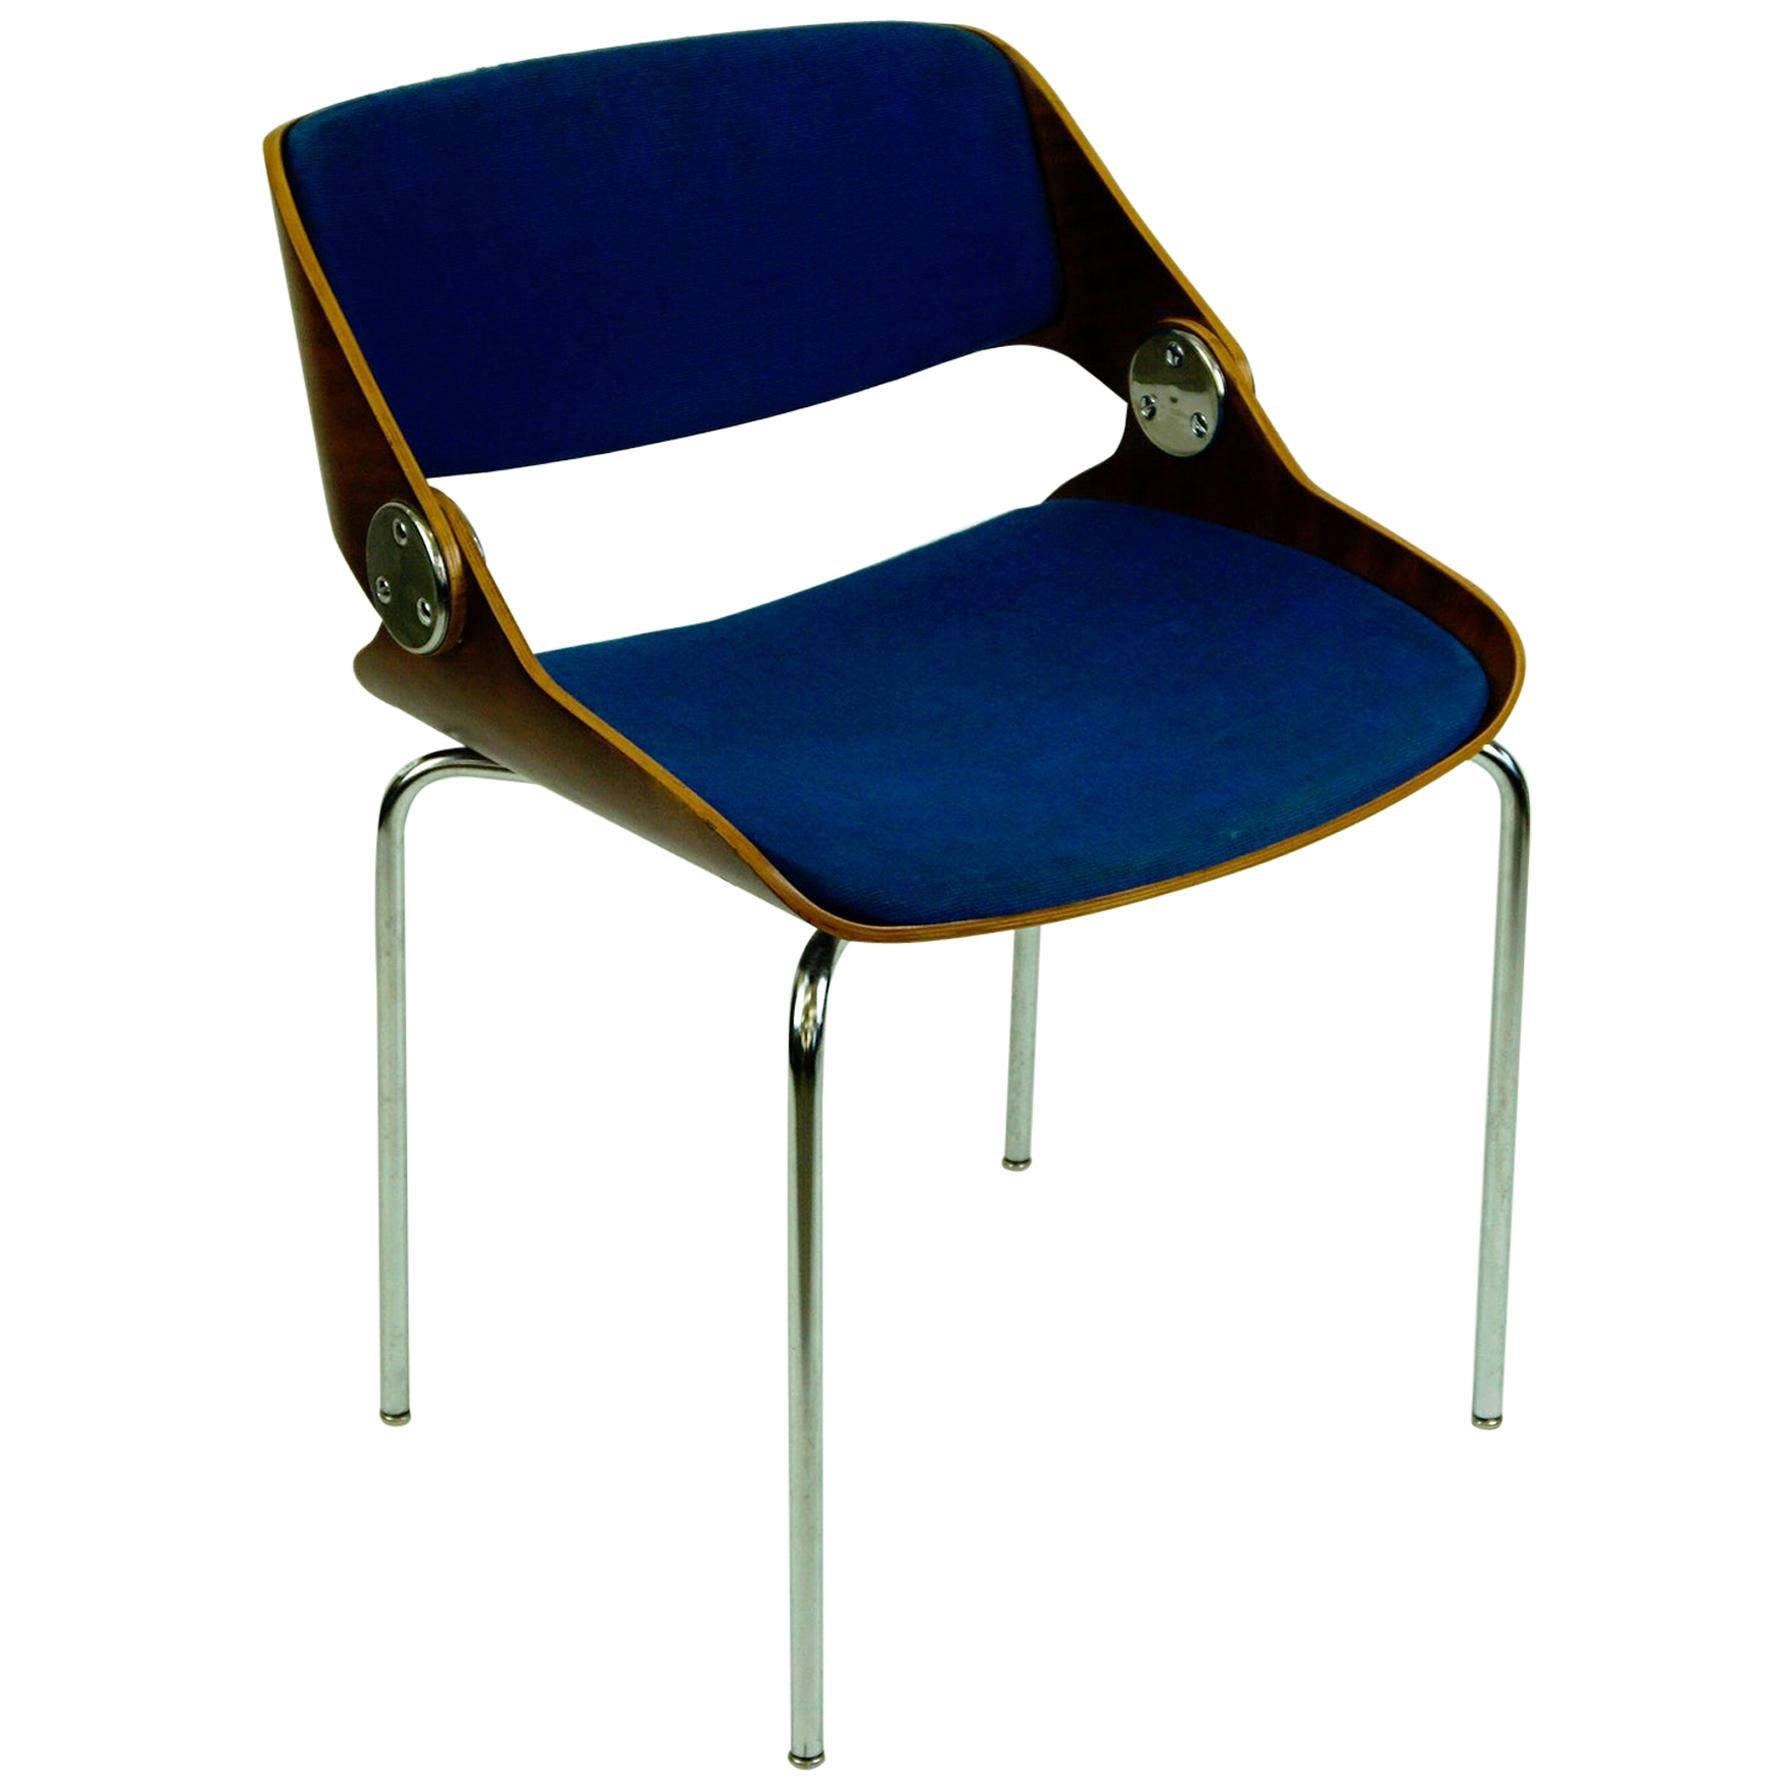 German 1960s Plywood and blue Fabric Chair by Eugen Schmidt for Soloform